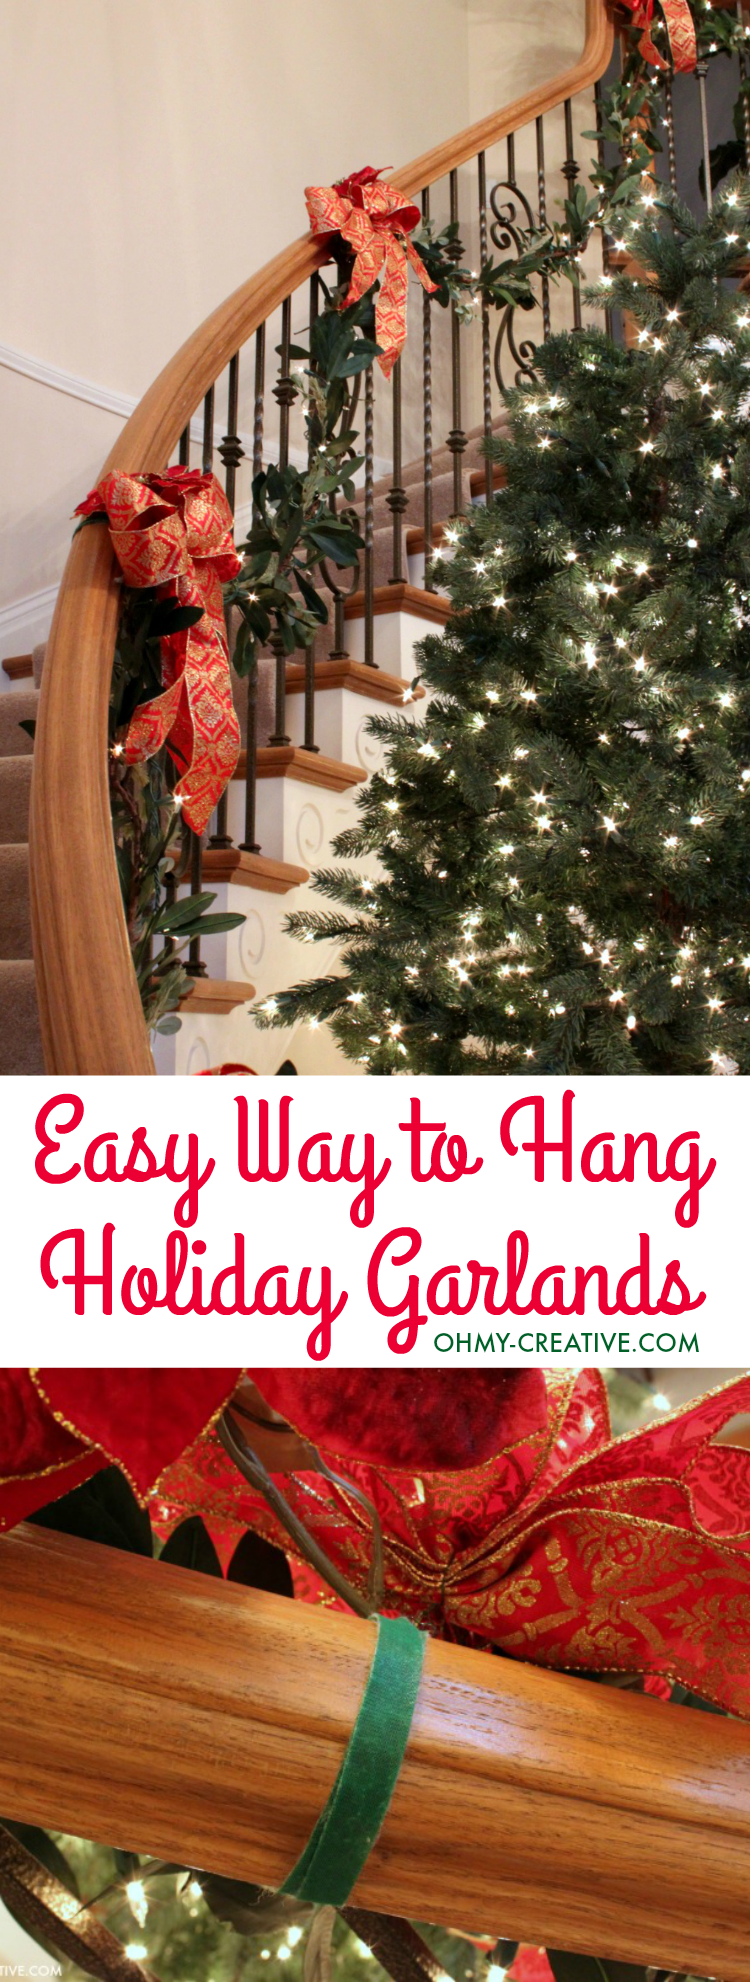 Cascading garland is a gorgeous way to decorate the staircase, but can seem to be a challenge to attach. With this quick tip, it can be so EASY to Hang Garland on Staircase Banisters | OHMY-CREATIVE.COM